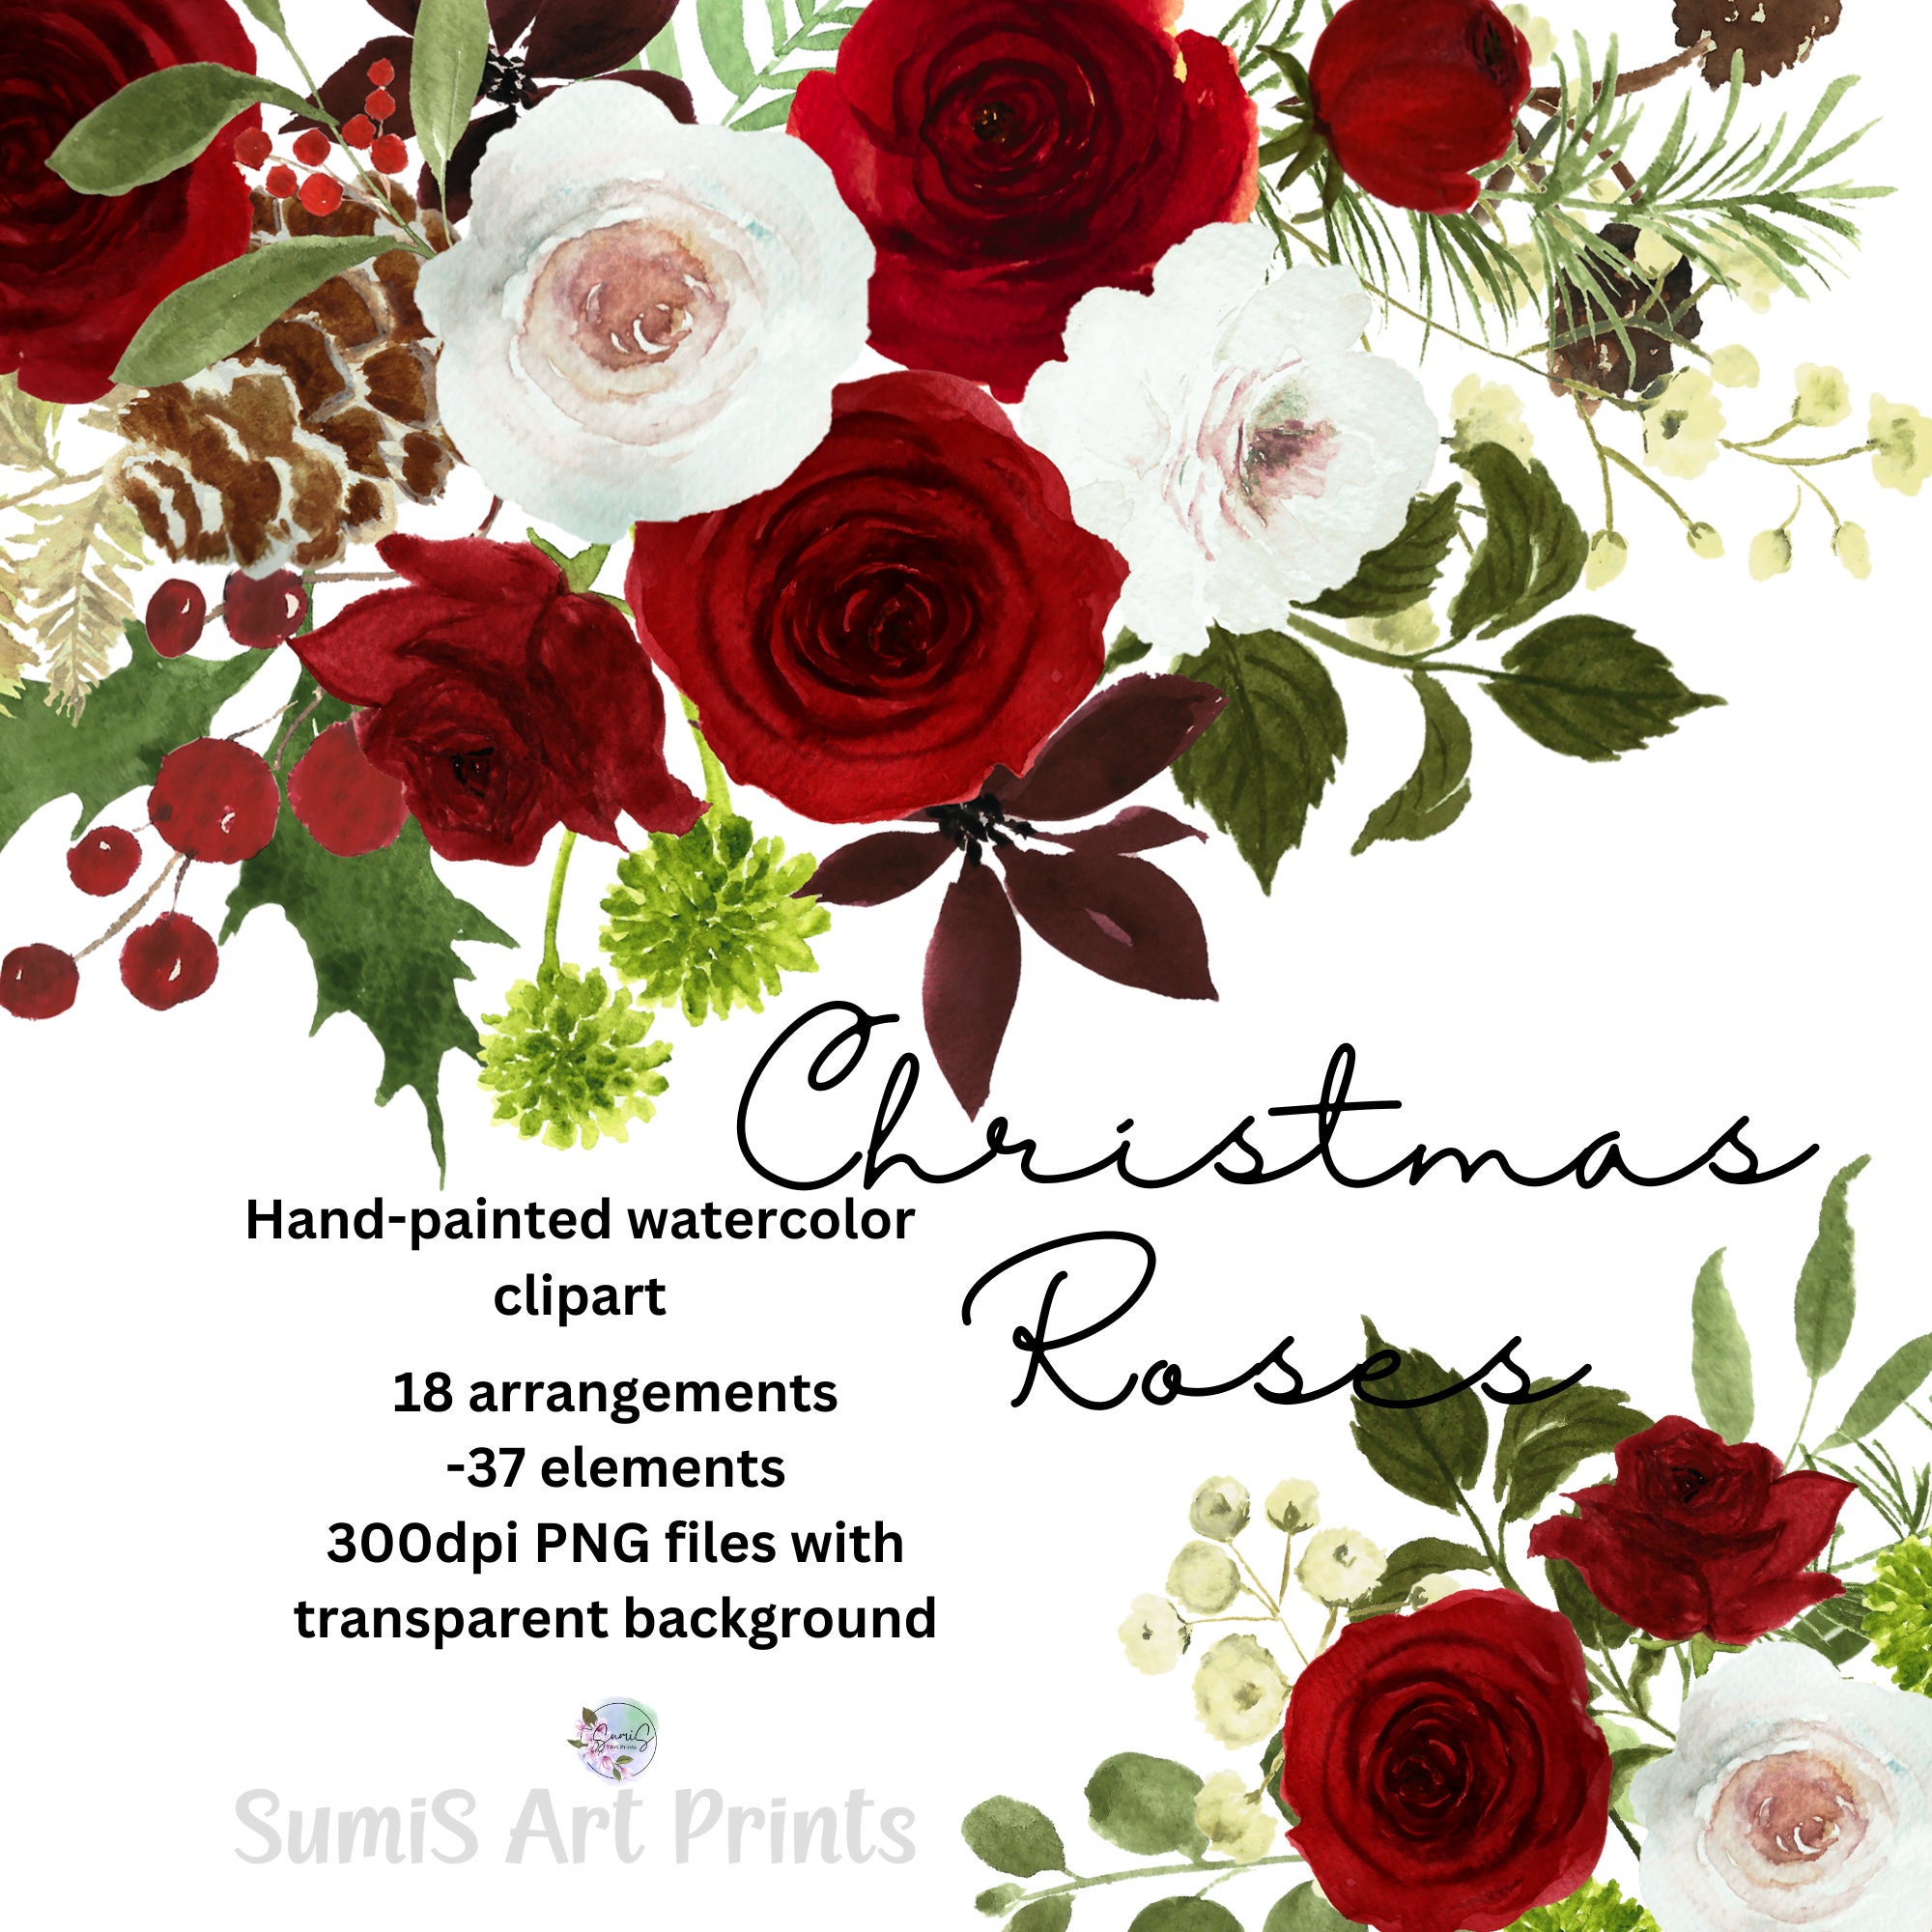 Episode 20: Hanataba Christmas bouquet! White roses, holly berries & w